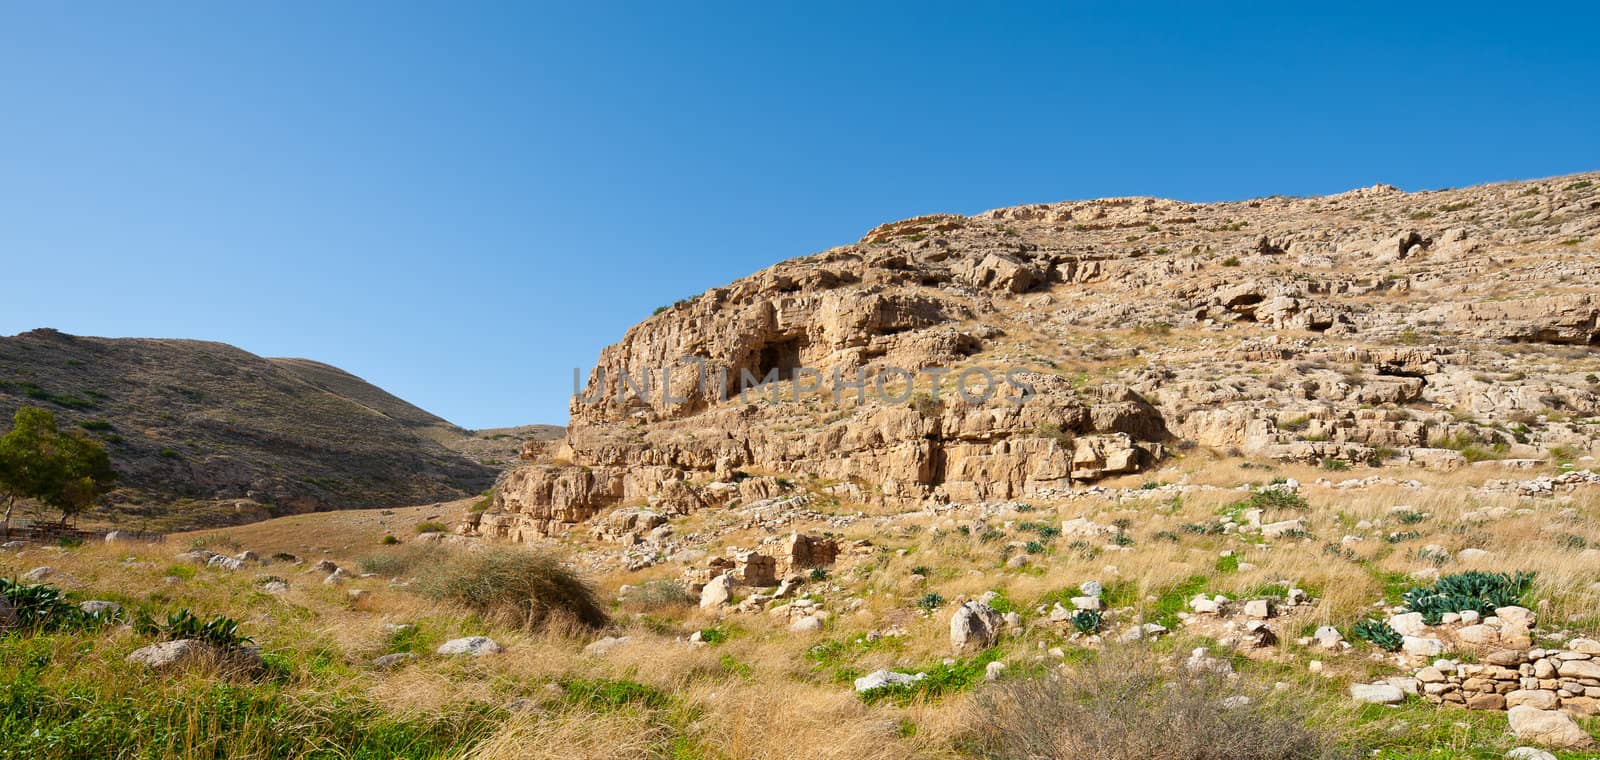 The Judean Mountains on the West Bank of the Jordan River